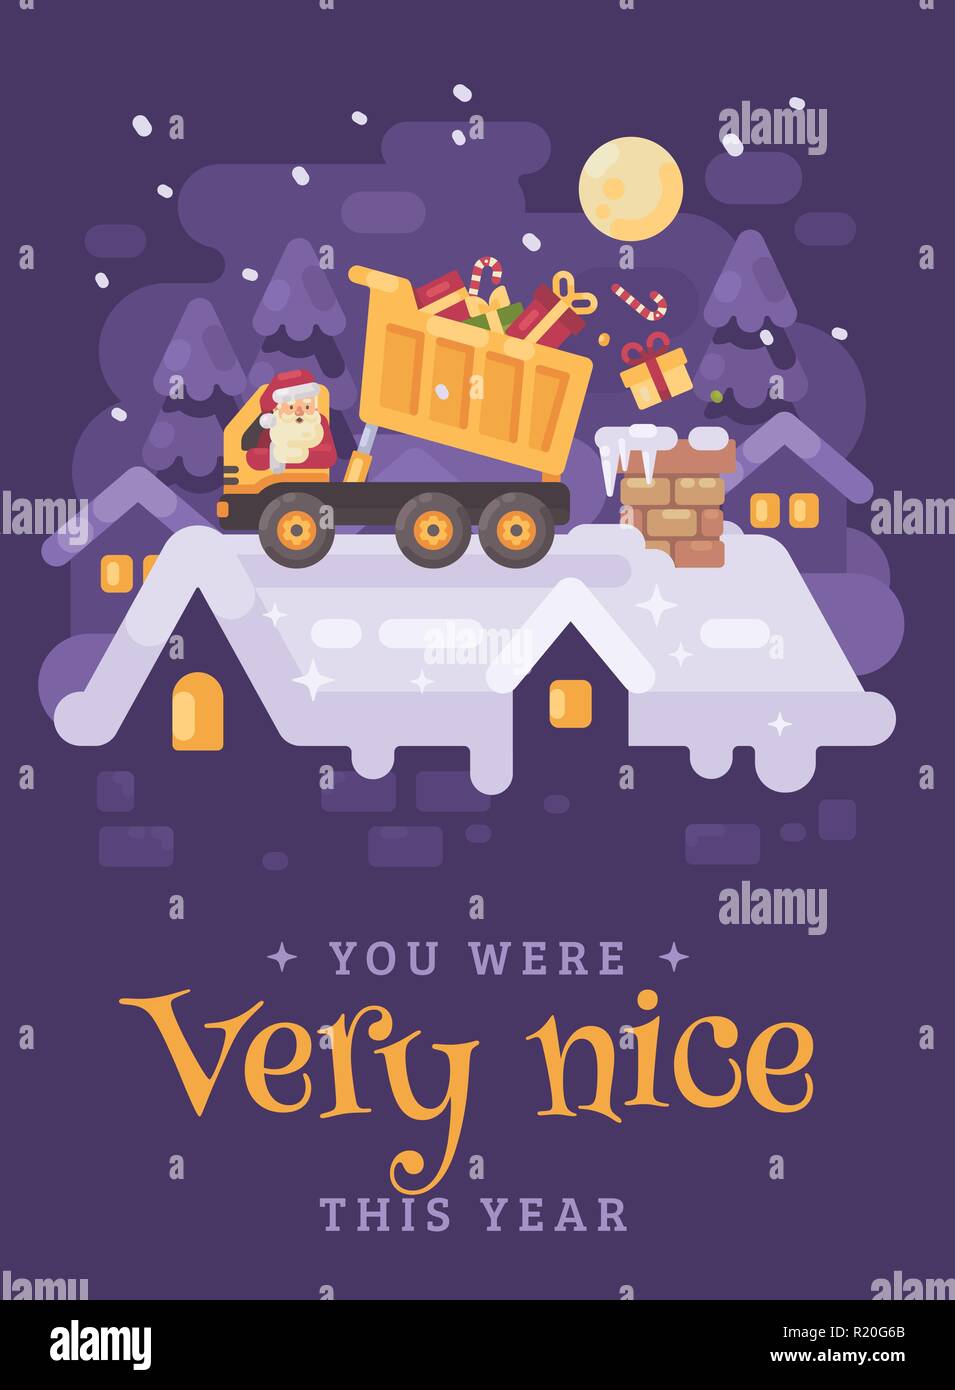 Santa Claus in a yellow tipper truck on a rooftop unloading presents into the chimney of a very nice kid. Christmas character illustration greeting ca Stock Vector